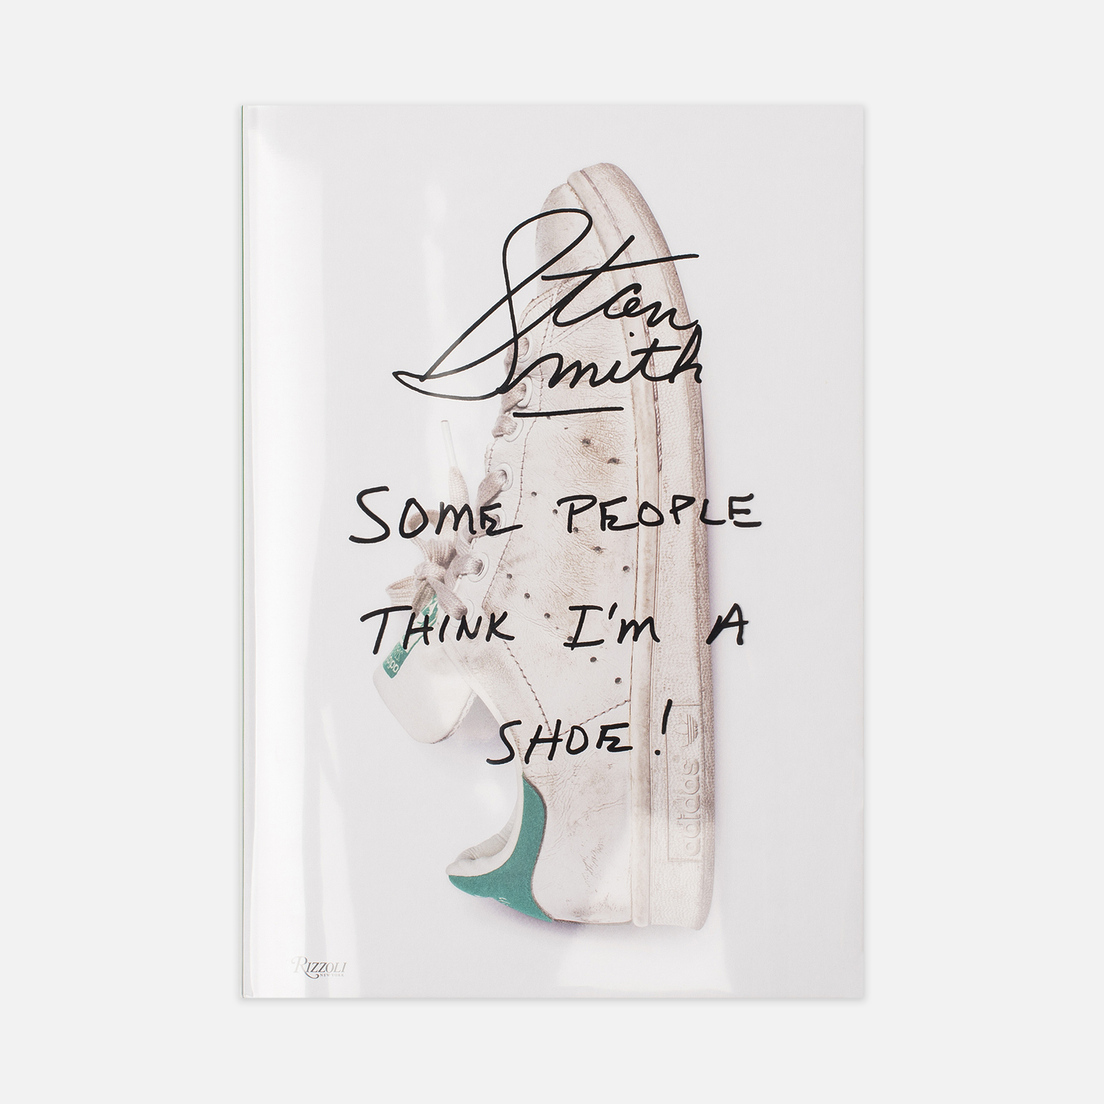 Rizzoli Книга Stan Smith: Some People Think I'm A Shoe